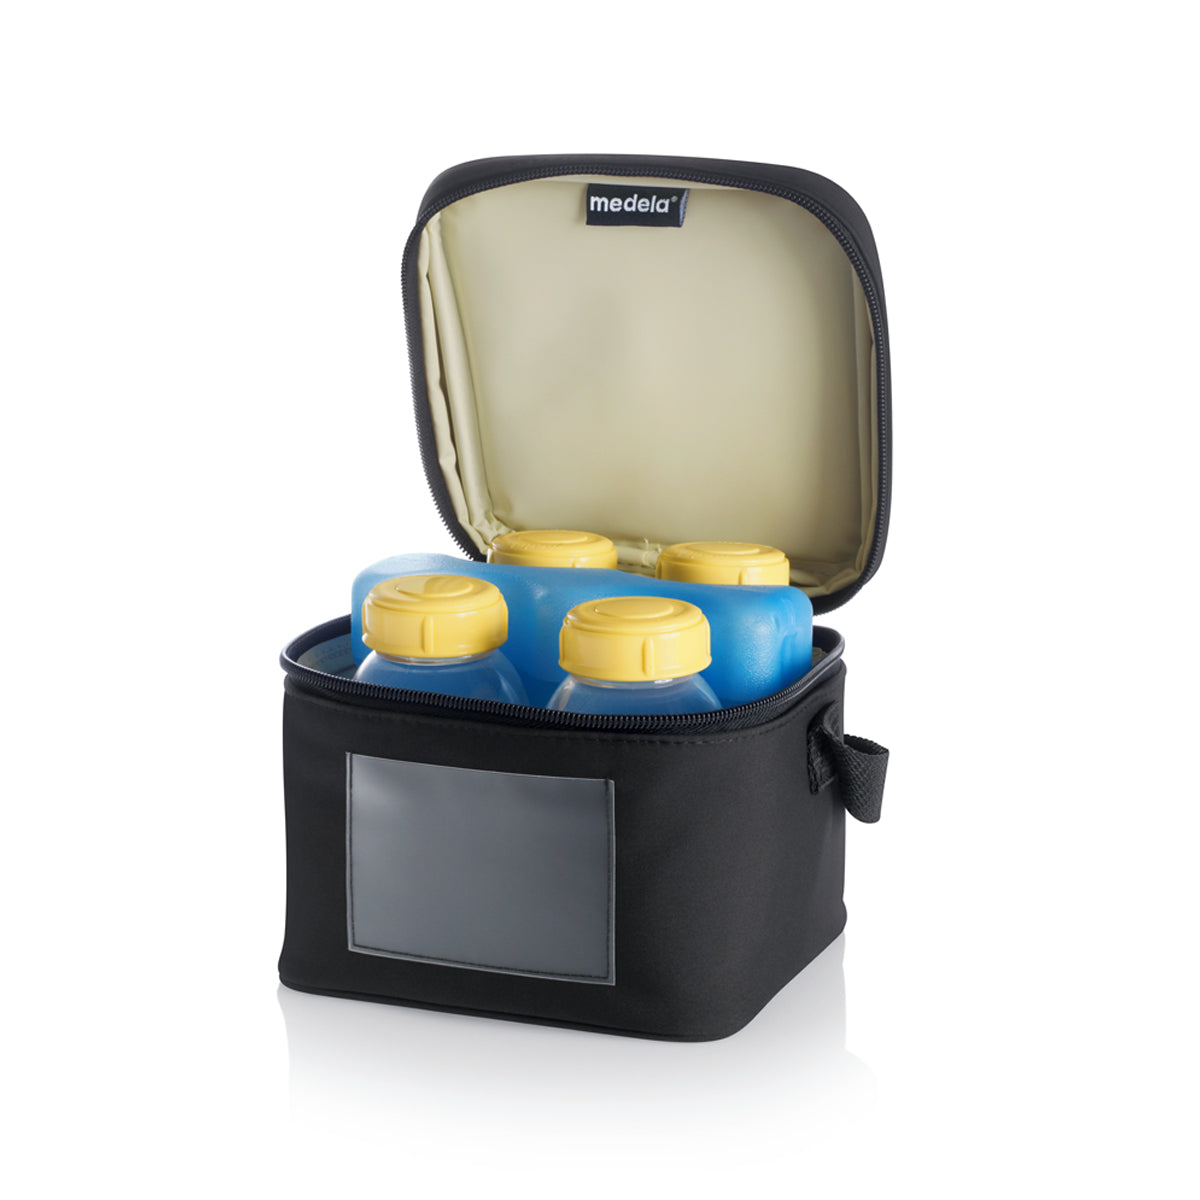 Medela Cooler Bag with 4 Bottles | Keep Milk Cool | Easy to Carry | Stylish Design for Working Mothers